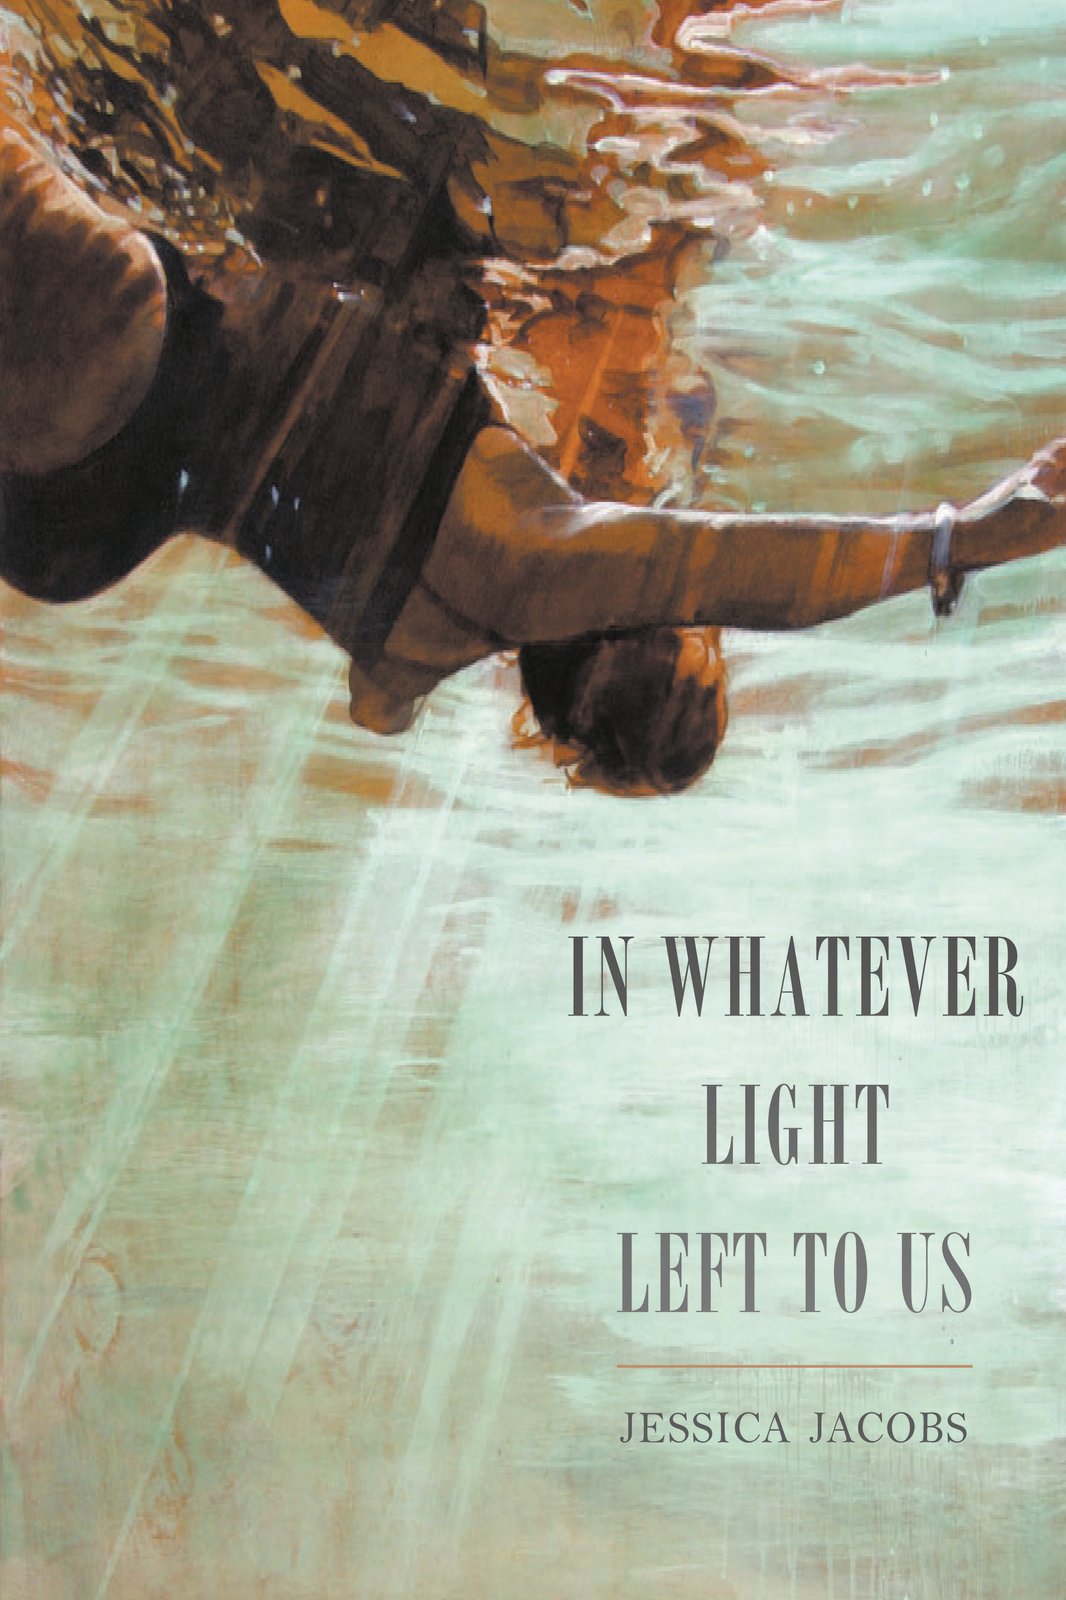 In Whatever Light Left to Us by Jessica Jacobs Sibling Rivalry Press